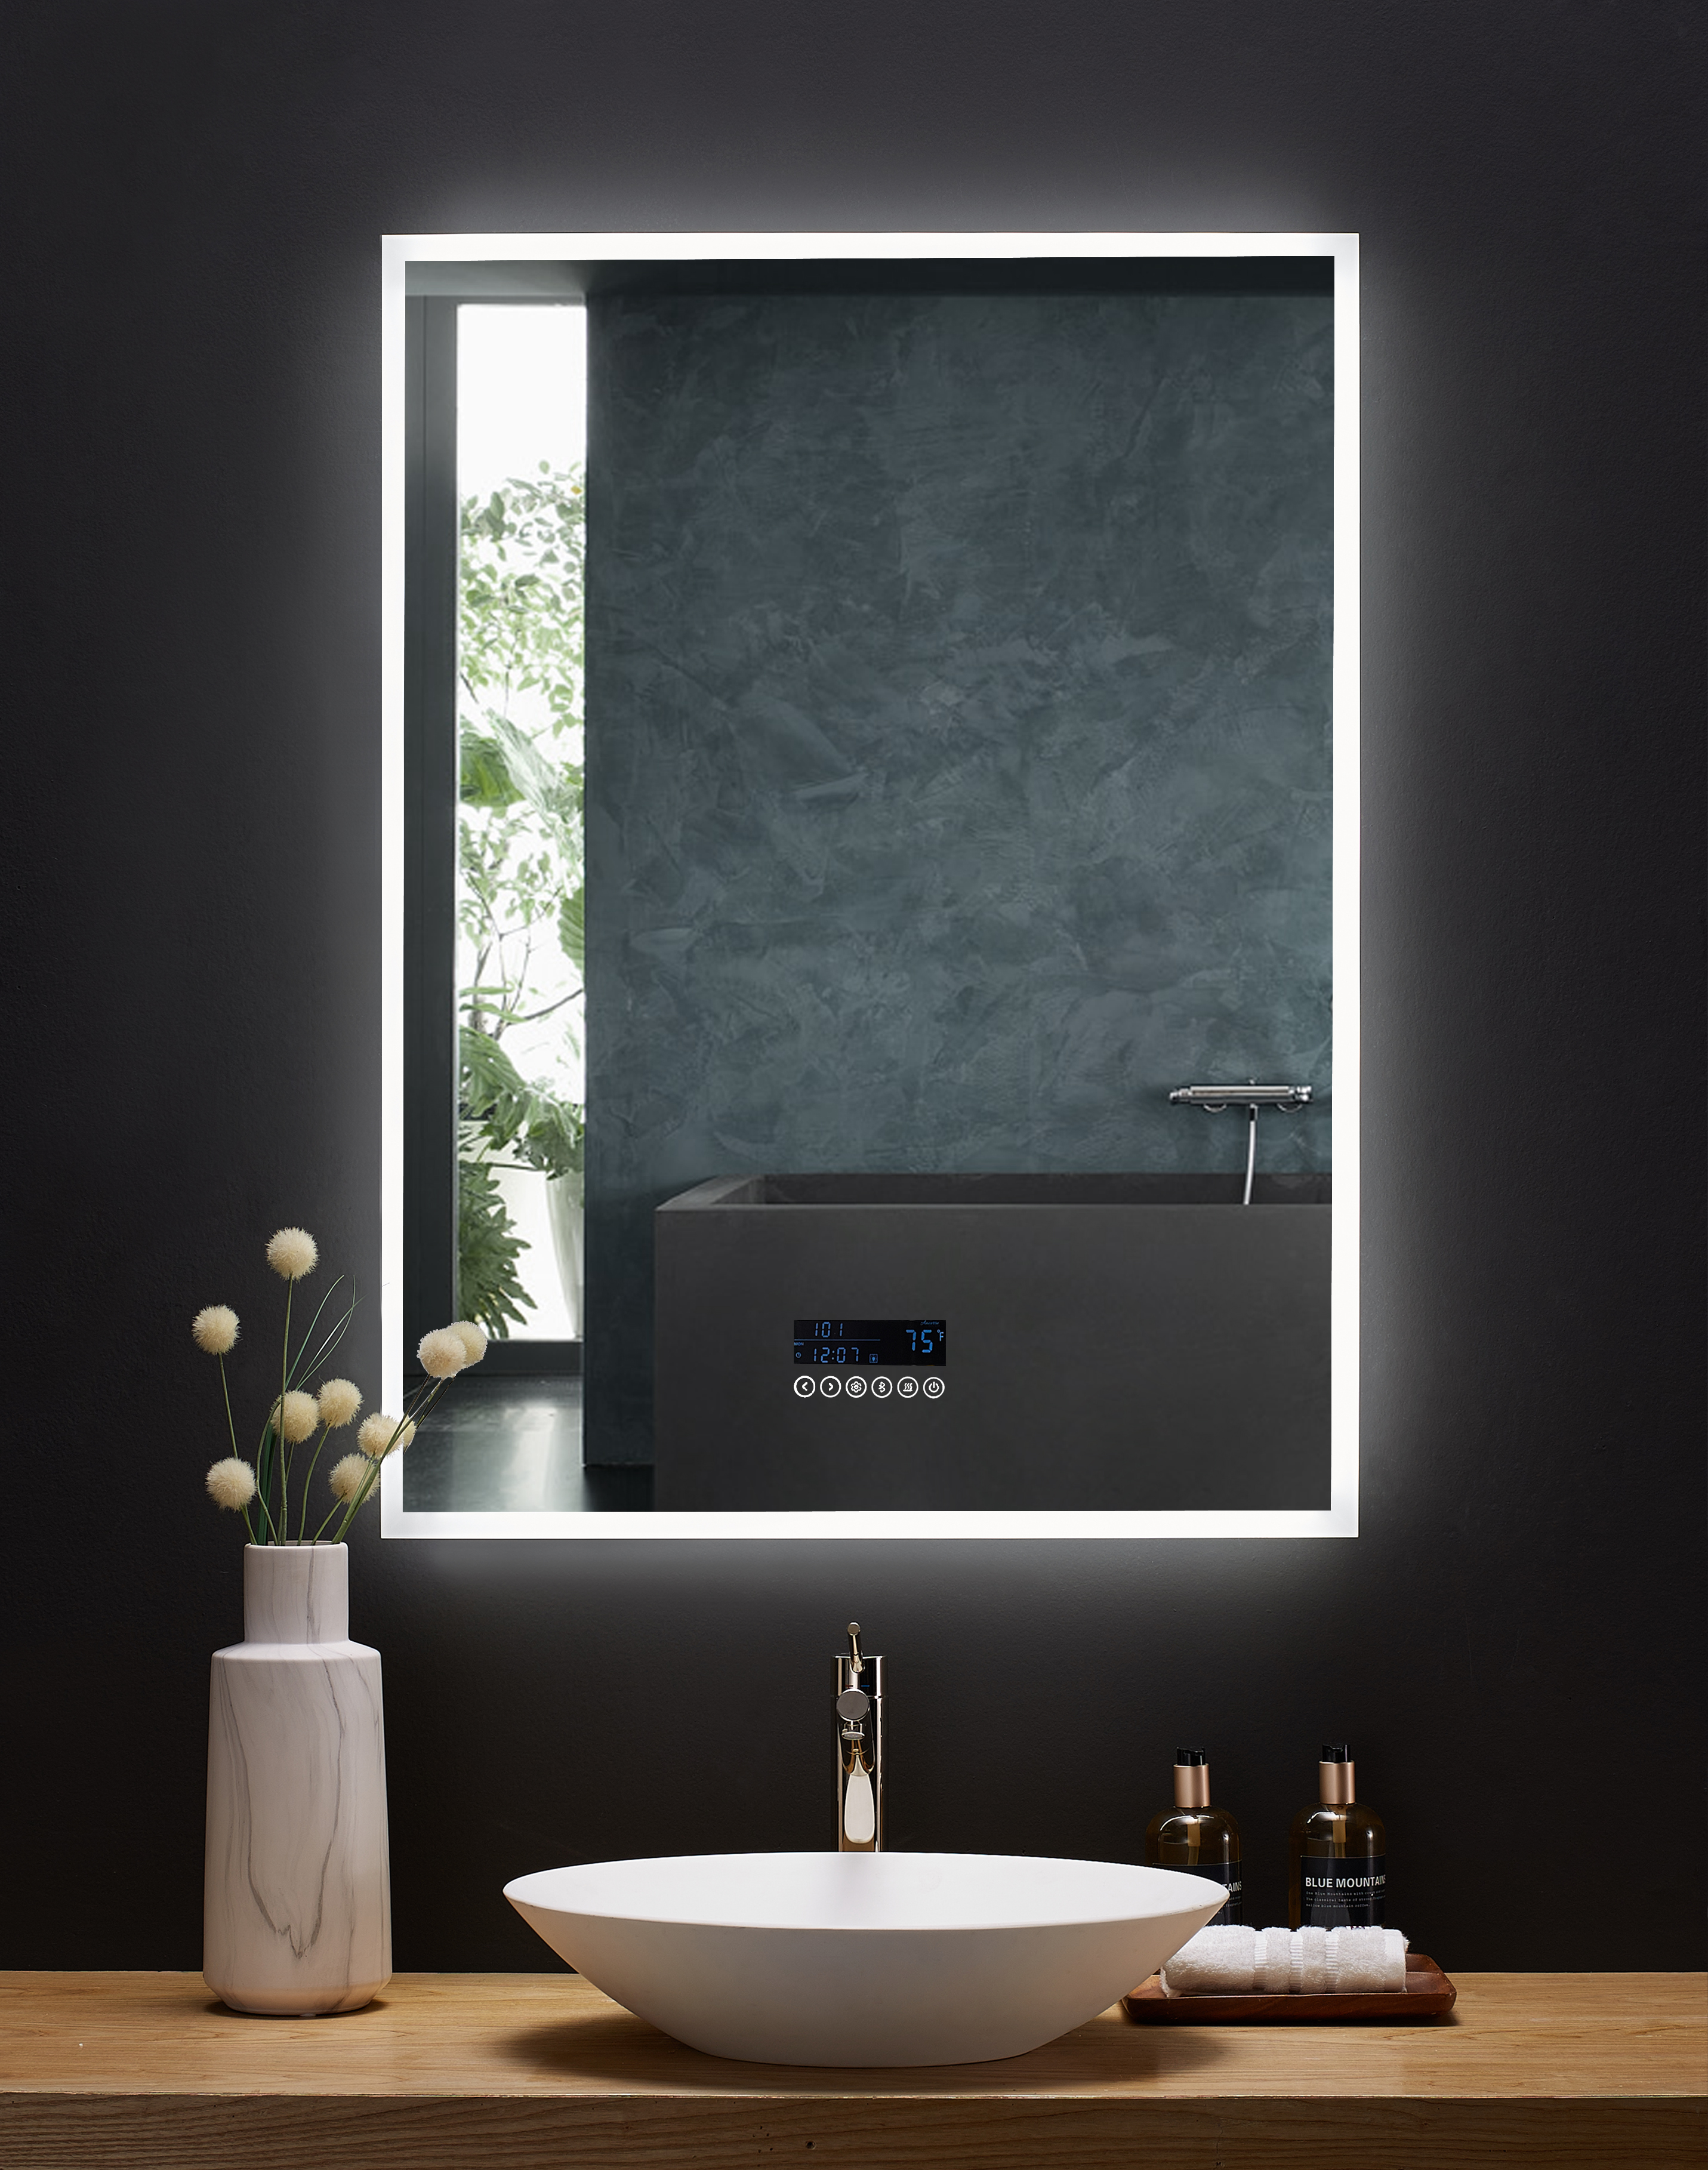 30 in. x 40 in. LED Frameless Mirror with Bluetooth, Defogger and Digital Display 